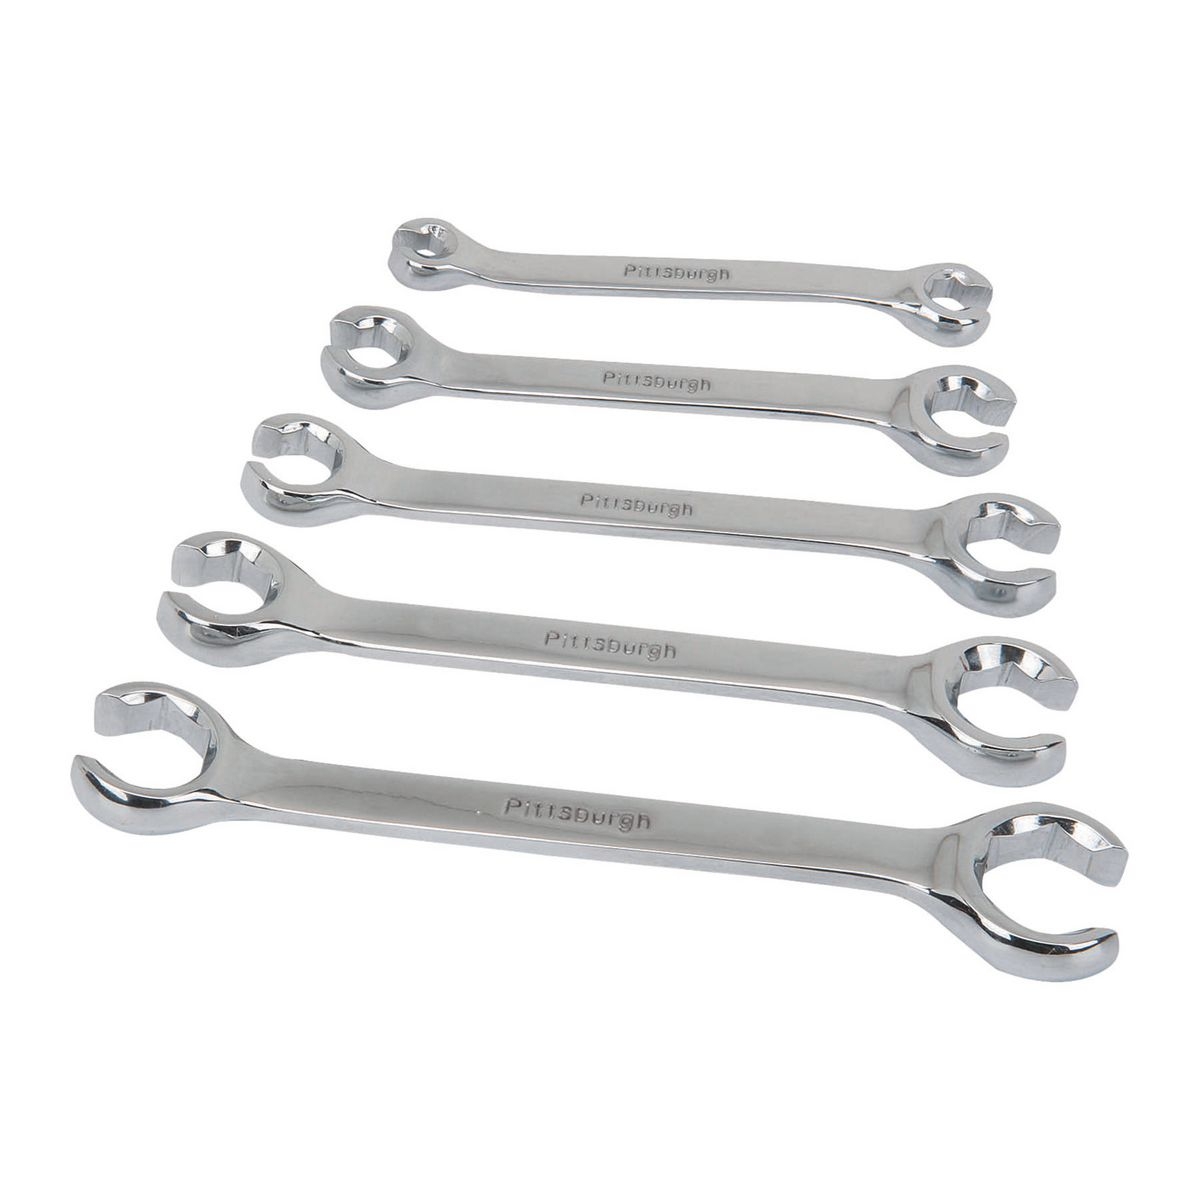 PITTSBURGH SAE Double-End Flare Nut Wrench Set 5 Pc. - Item 68865 / 61358